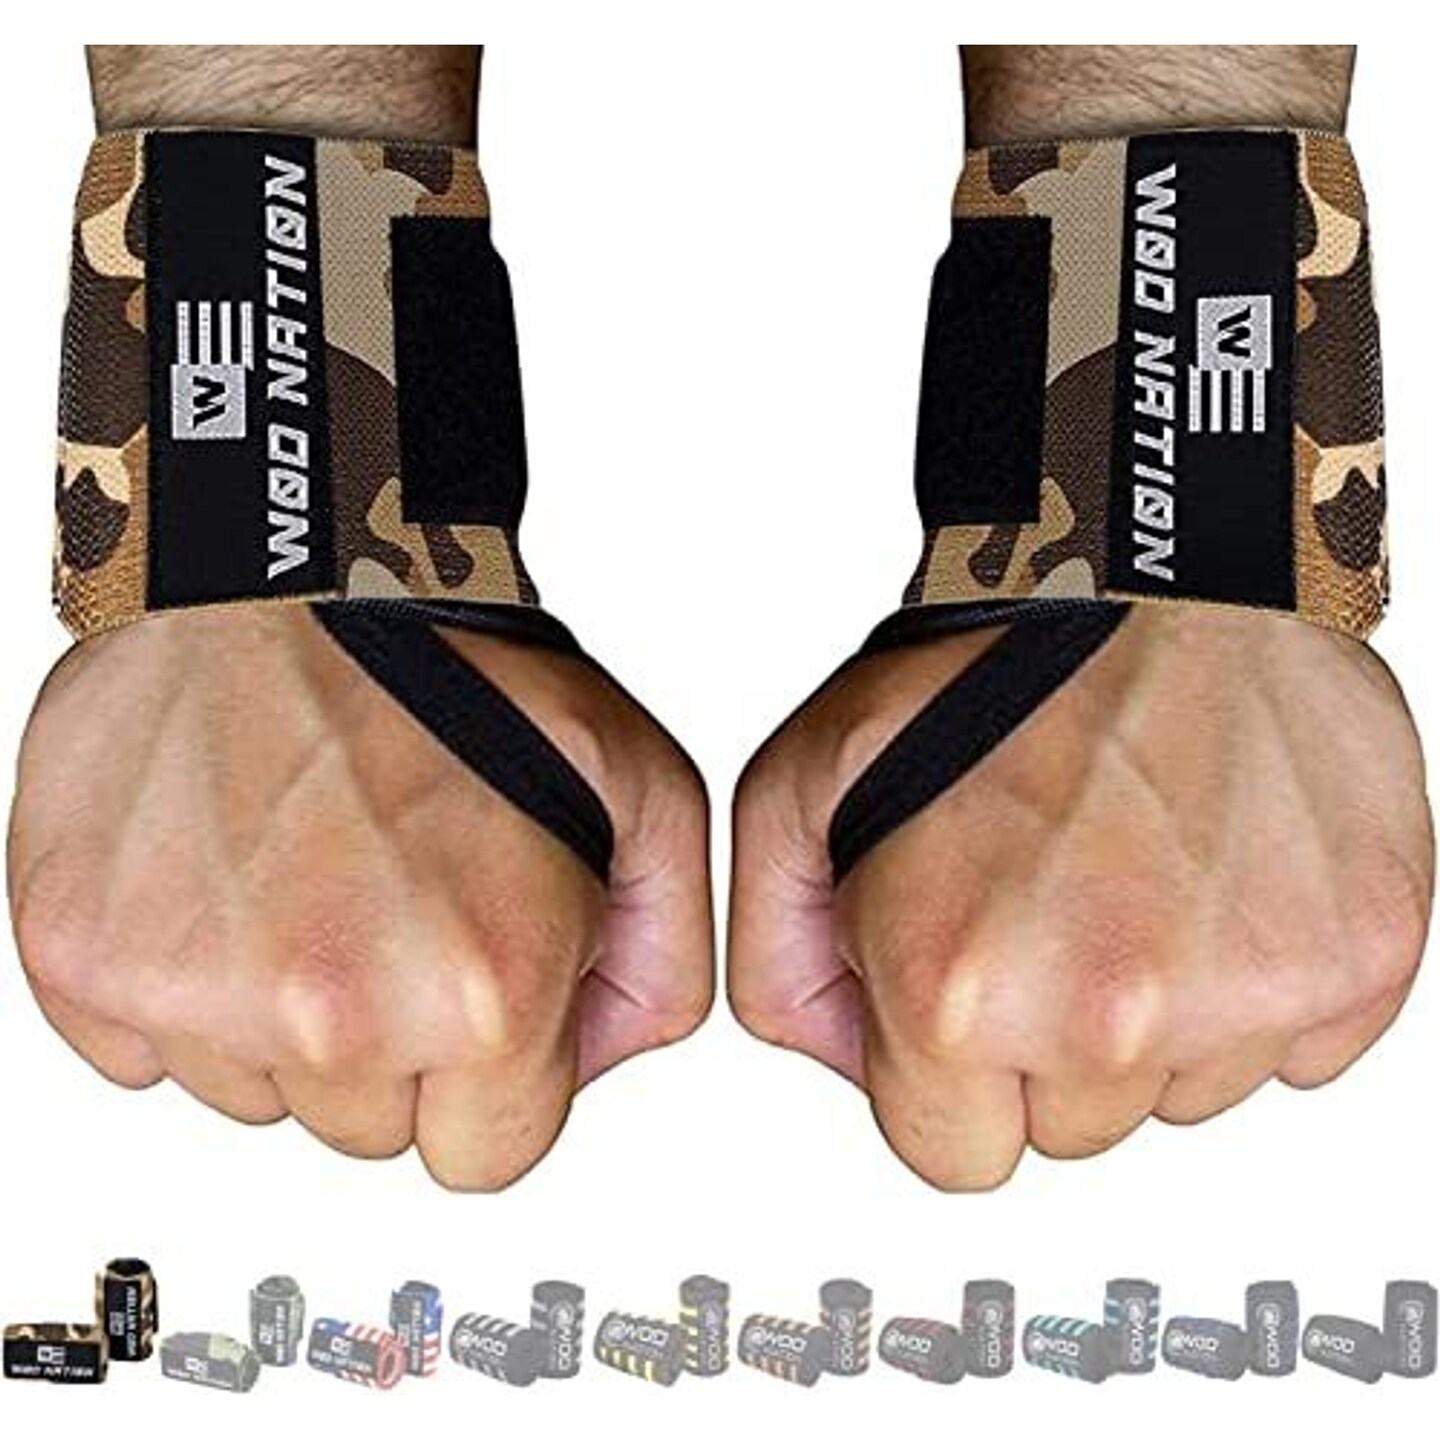 Professional Wrist Wraps &#x26; Straps for Gym &#x26; Weightlifting (12 inch) - Weight Lifting Wrist Wraps &#x26; Gym Wrist Straps Support for Optimal Powerlifting Performance For Women &#x26; Men - Camo